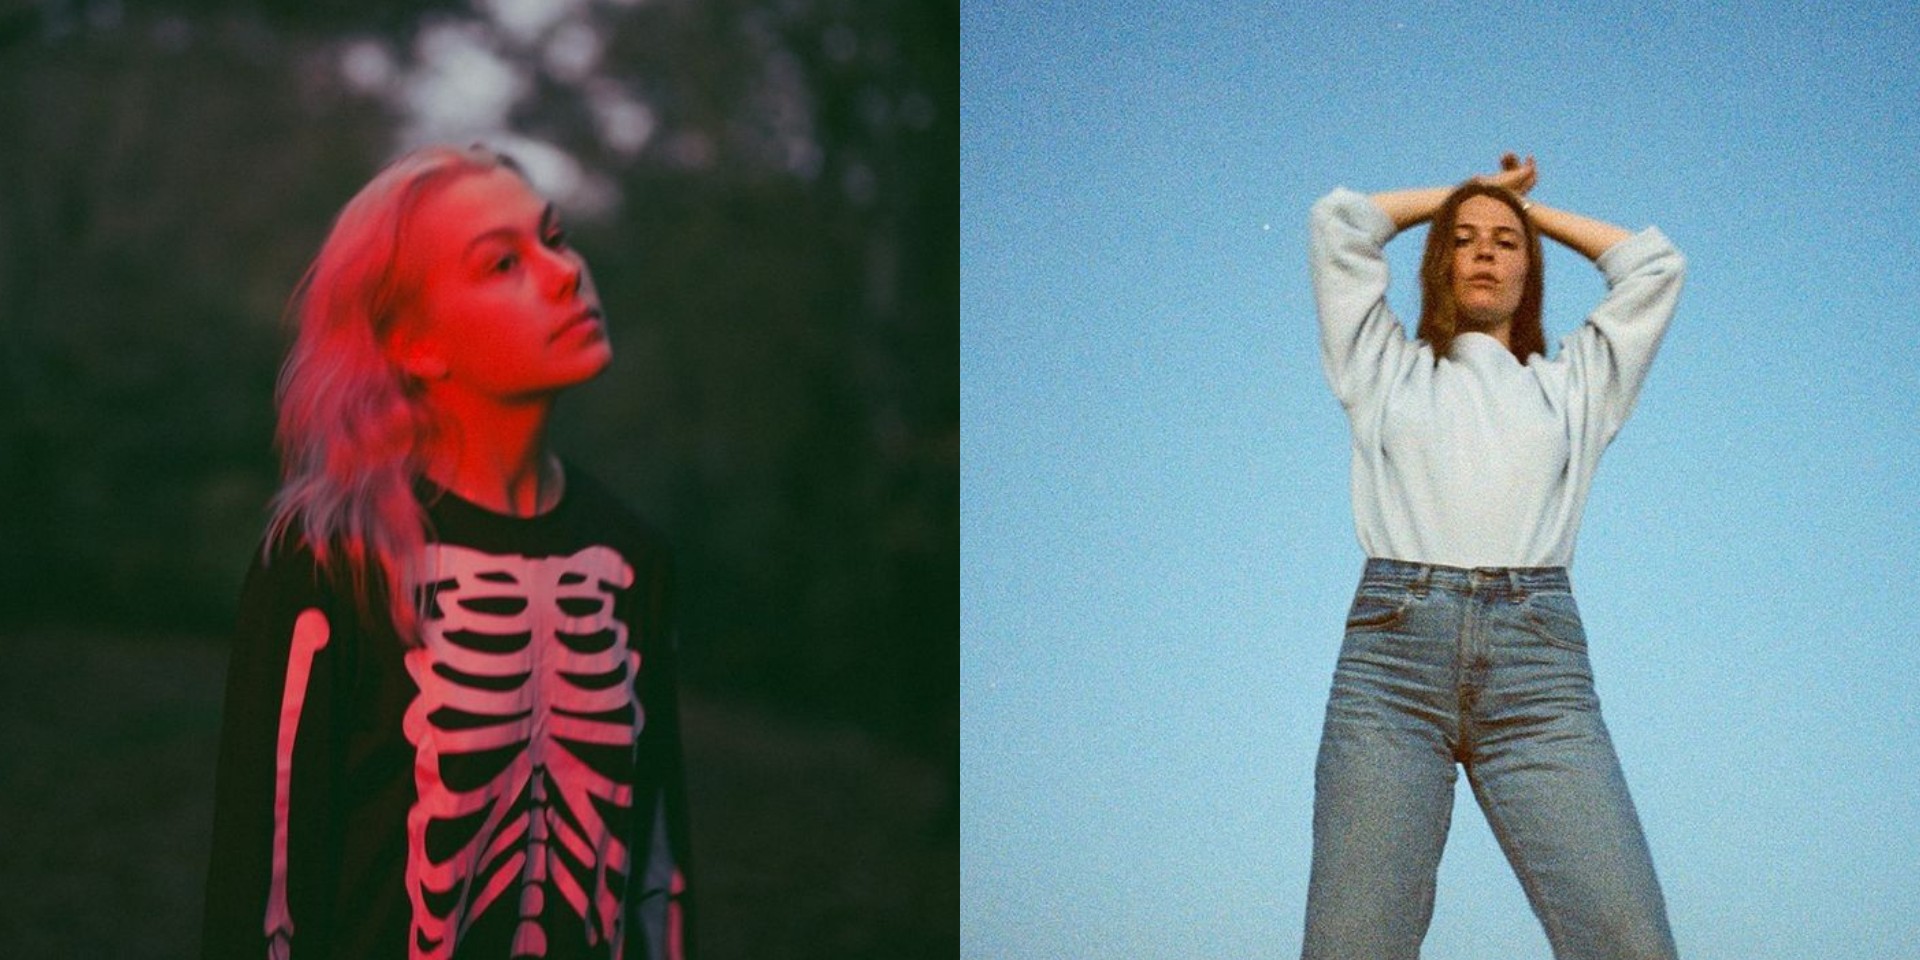 Phoebe Bridgers and Maggie Rogers team up to cover Goo Goo Dolls' 'Iris' for Fair Fight